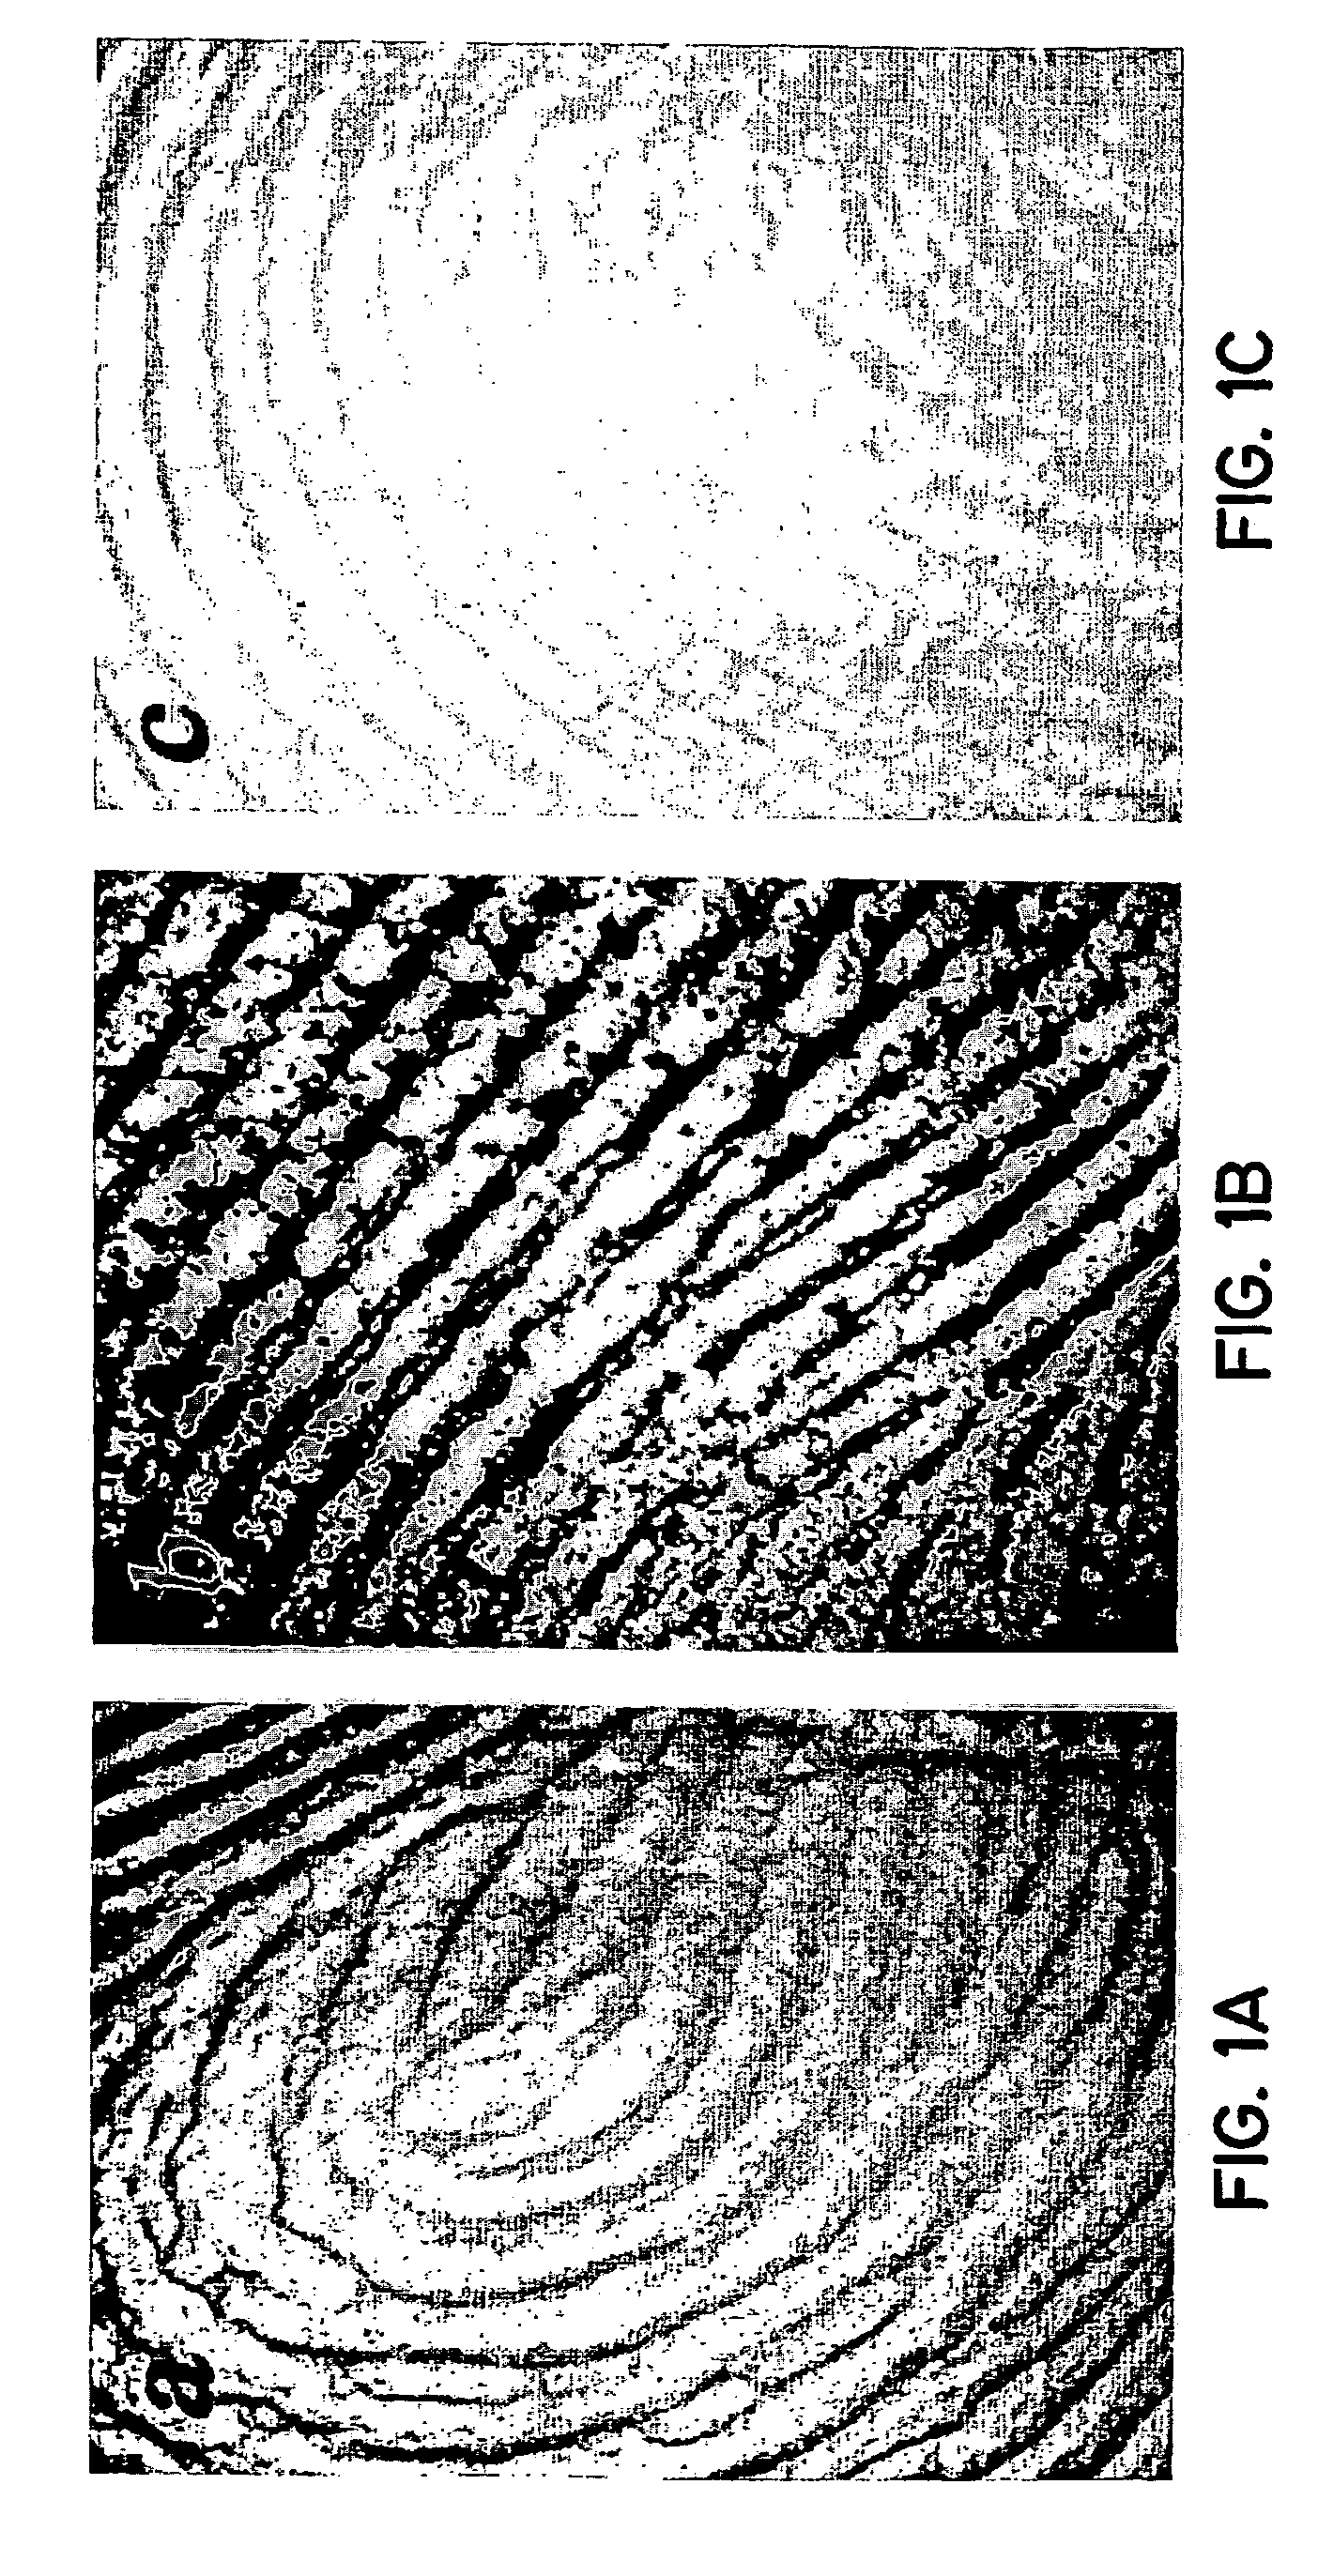 Simulated vernix compositions for skin cleansing and other applications